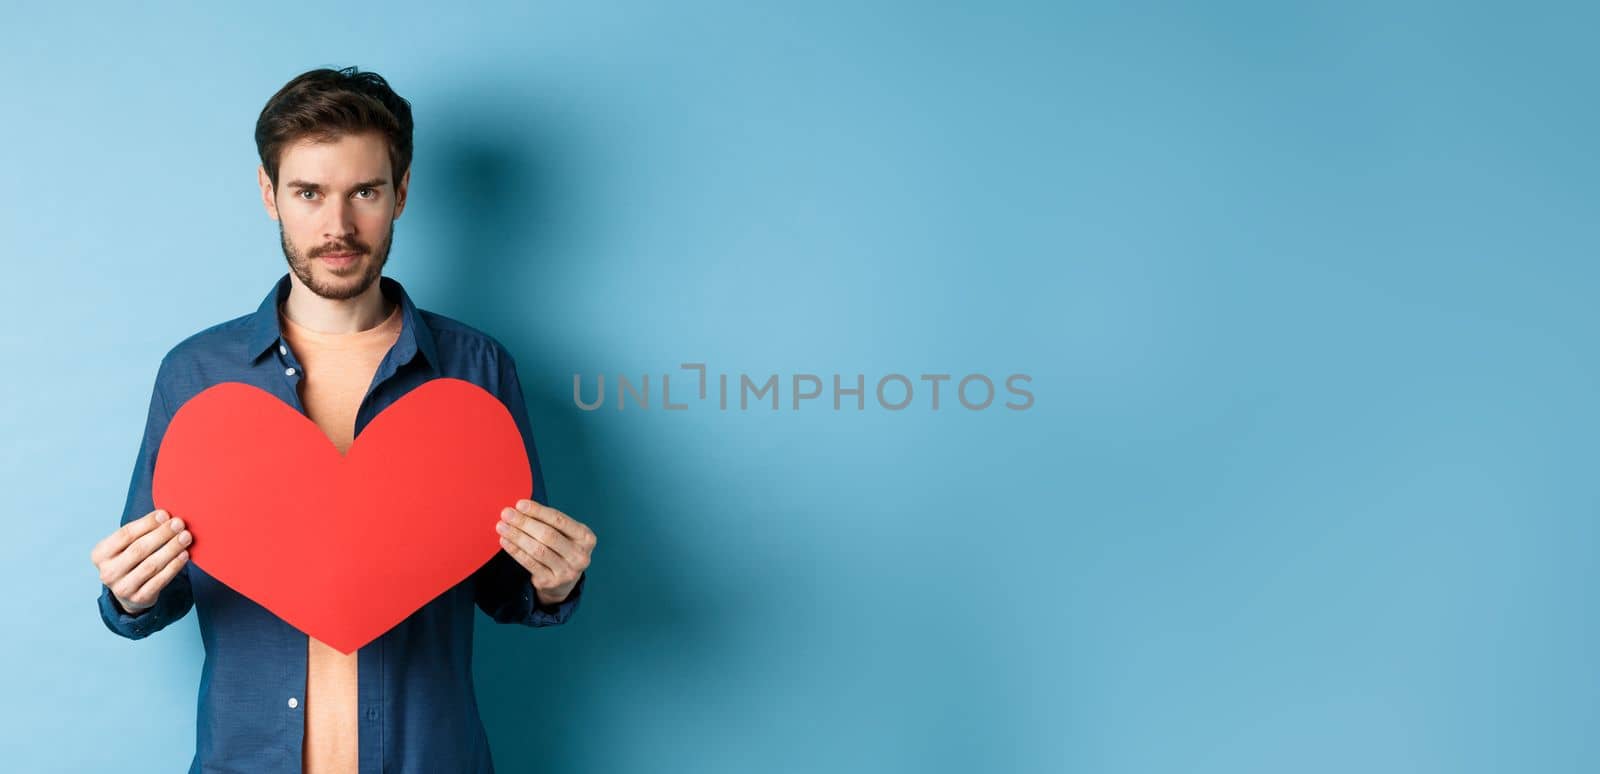 Young man looking for soulmate on valentines day, holding big red heart and looking at camera, standing over blue background.